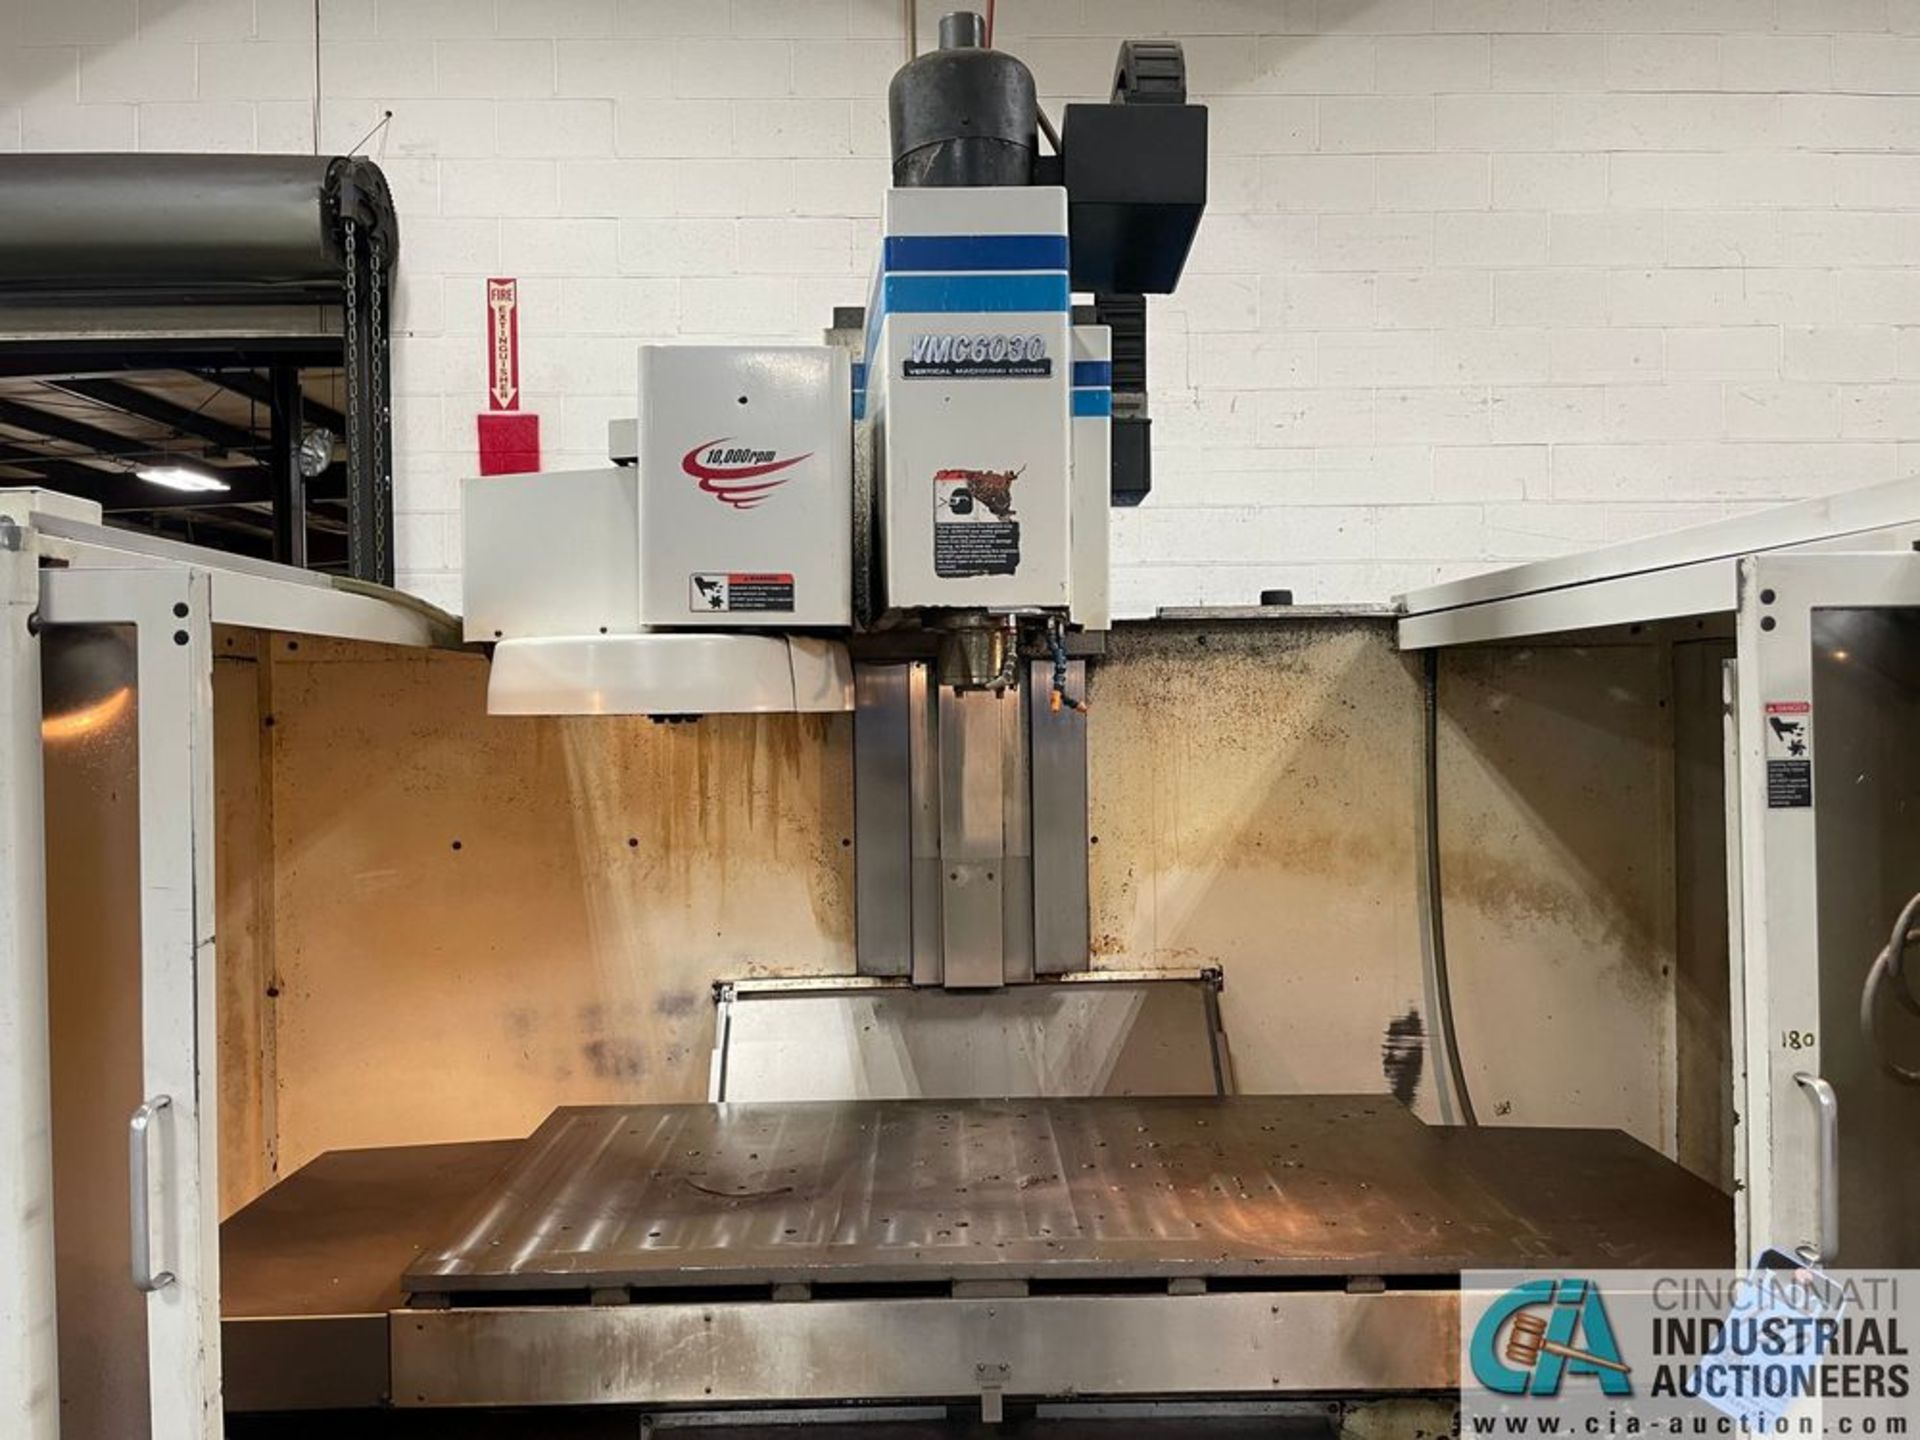 MAG FADAL VMC6030 CNC VERTICAL MACHINING CENTER; **Loading Fee Due the "ERRA" $750.00** - Image 2 of 11